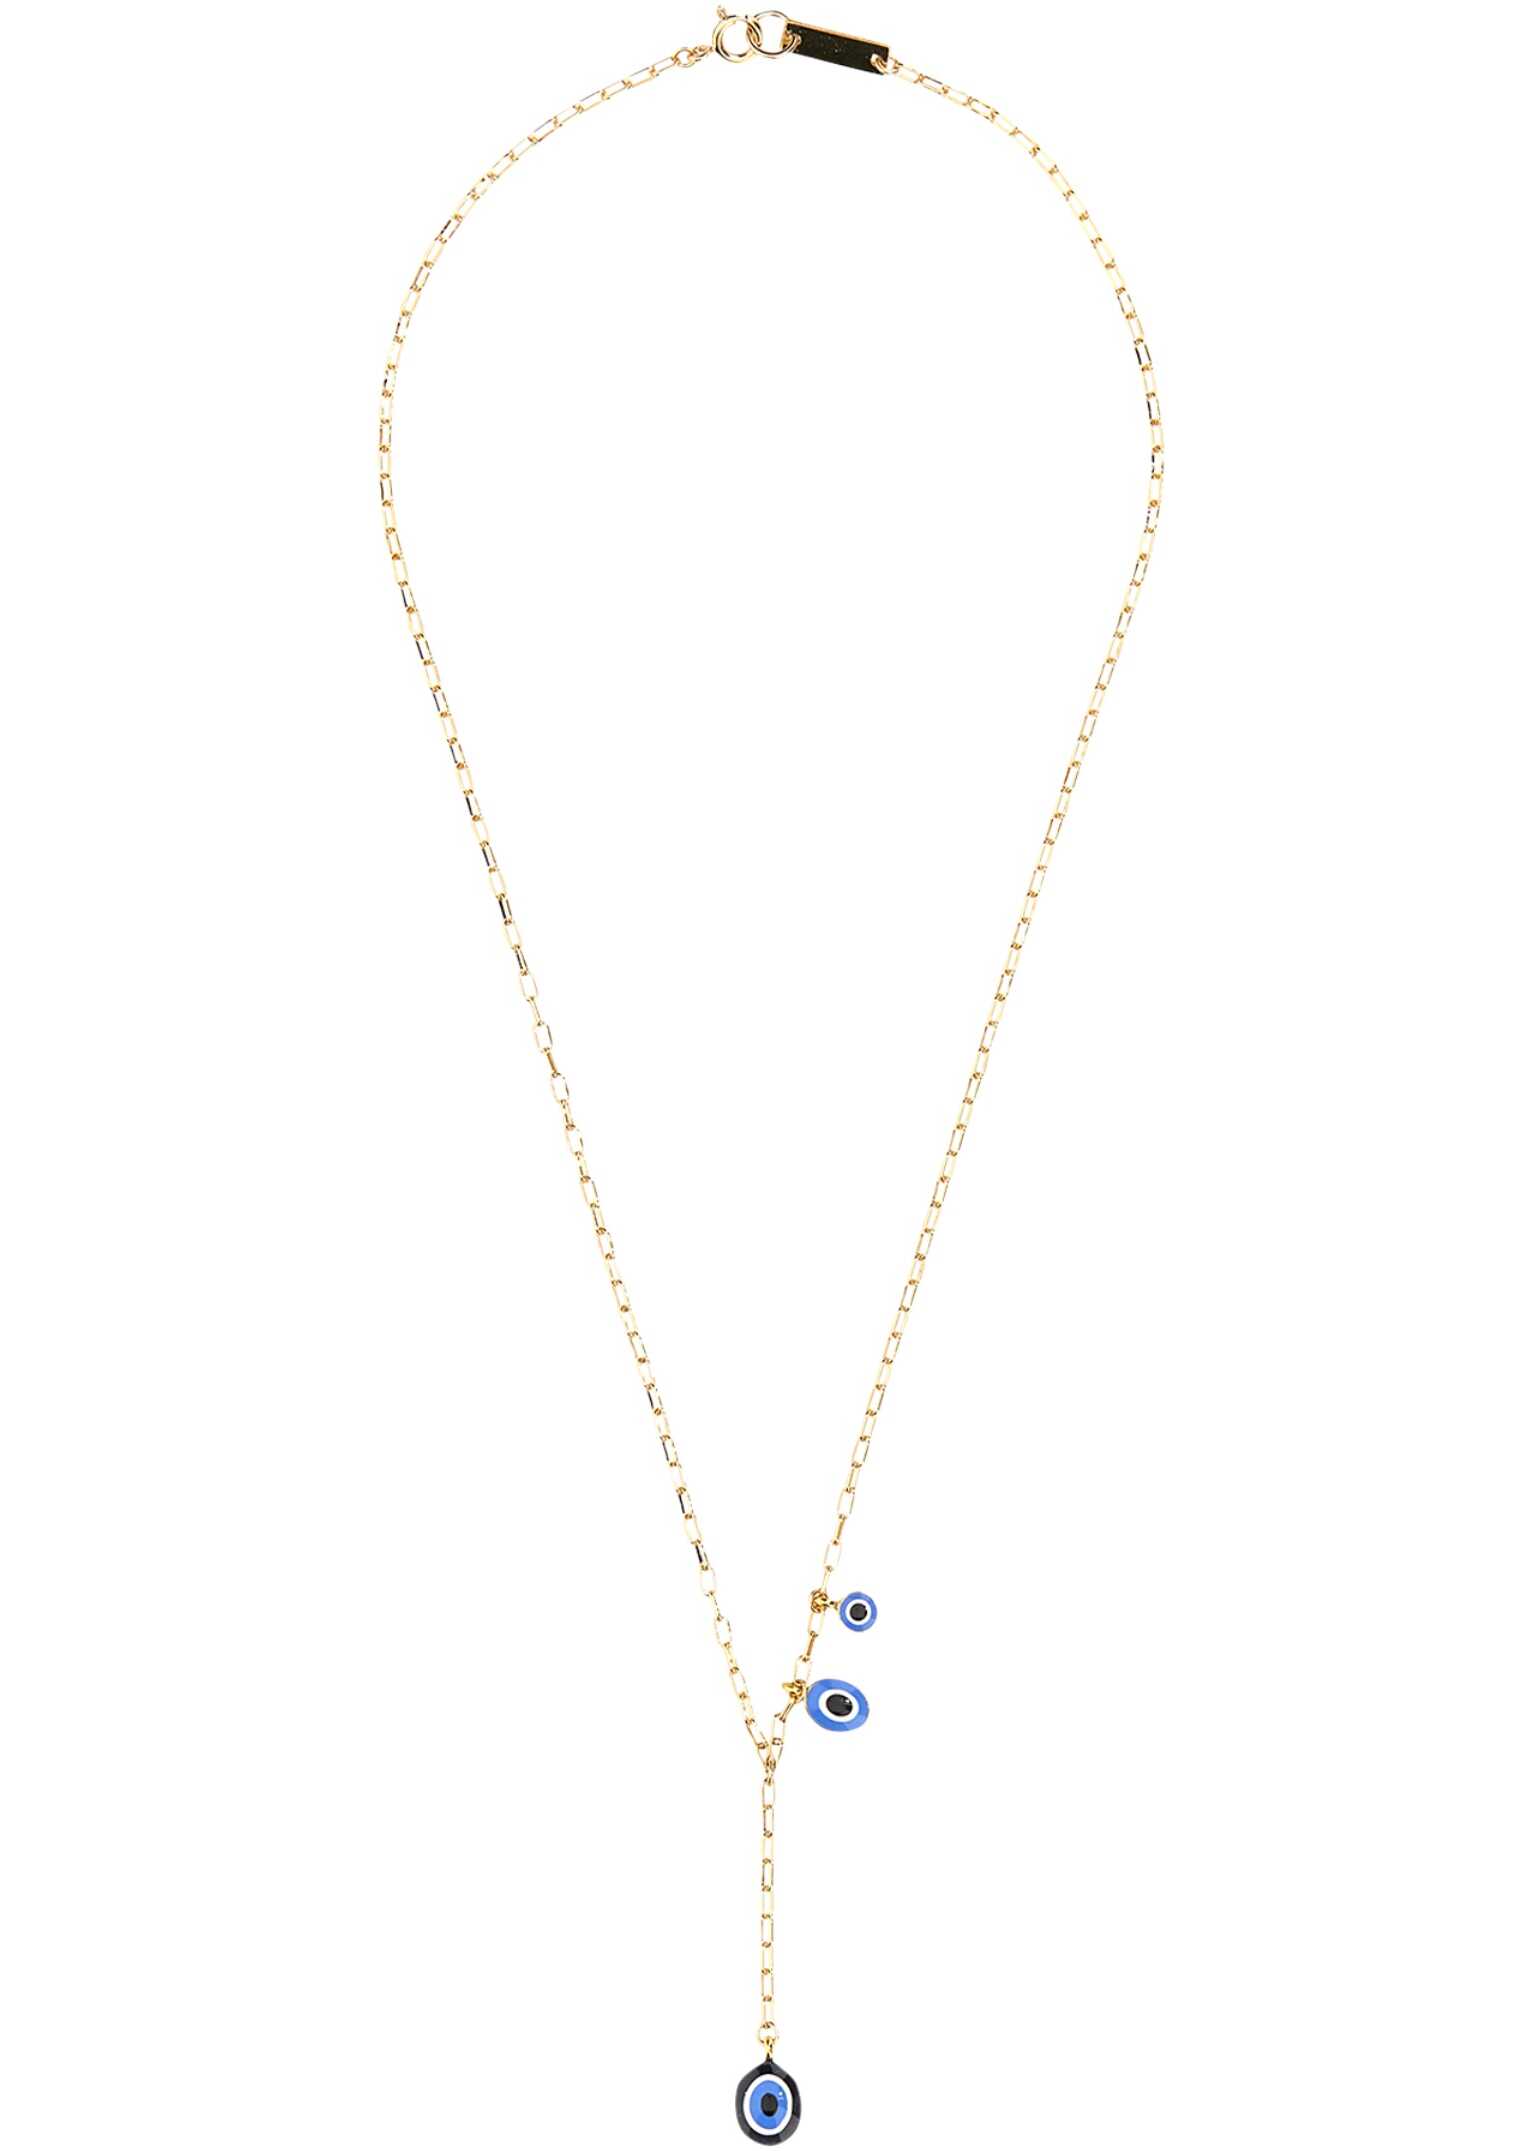 Isabel Marant Lucky Necklace. BLUE